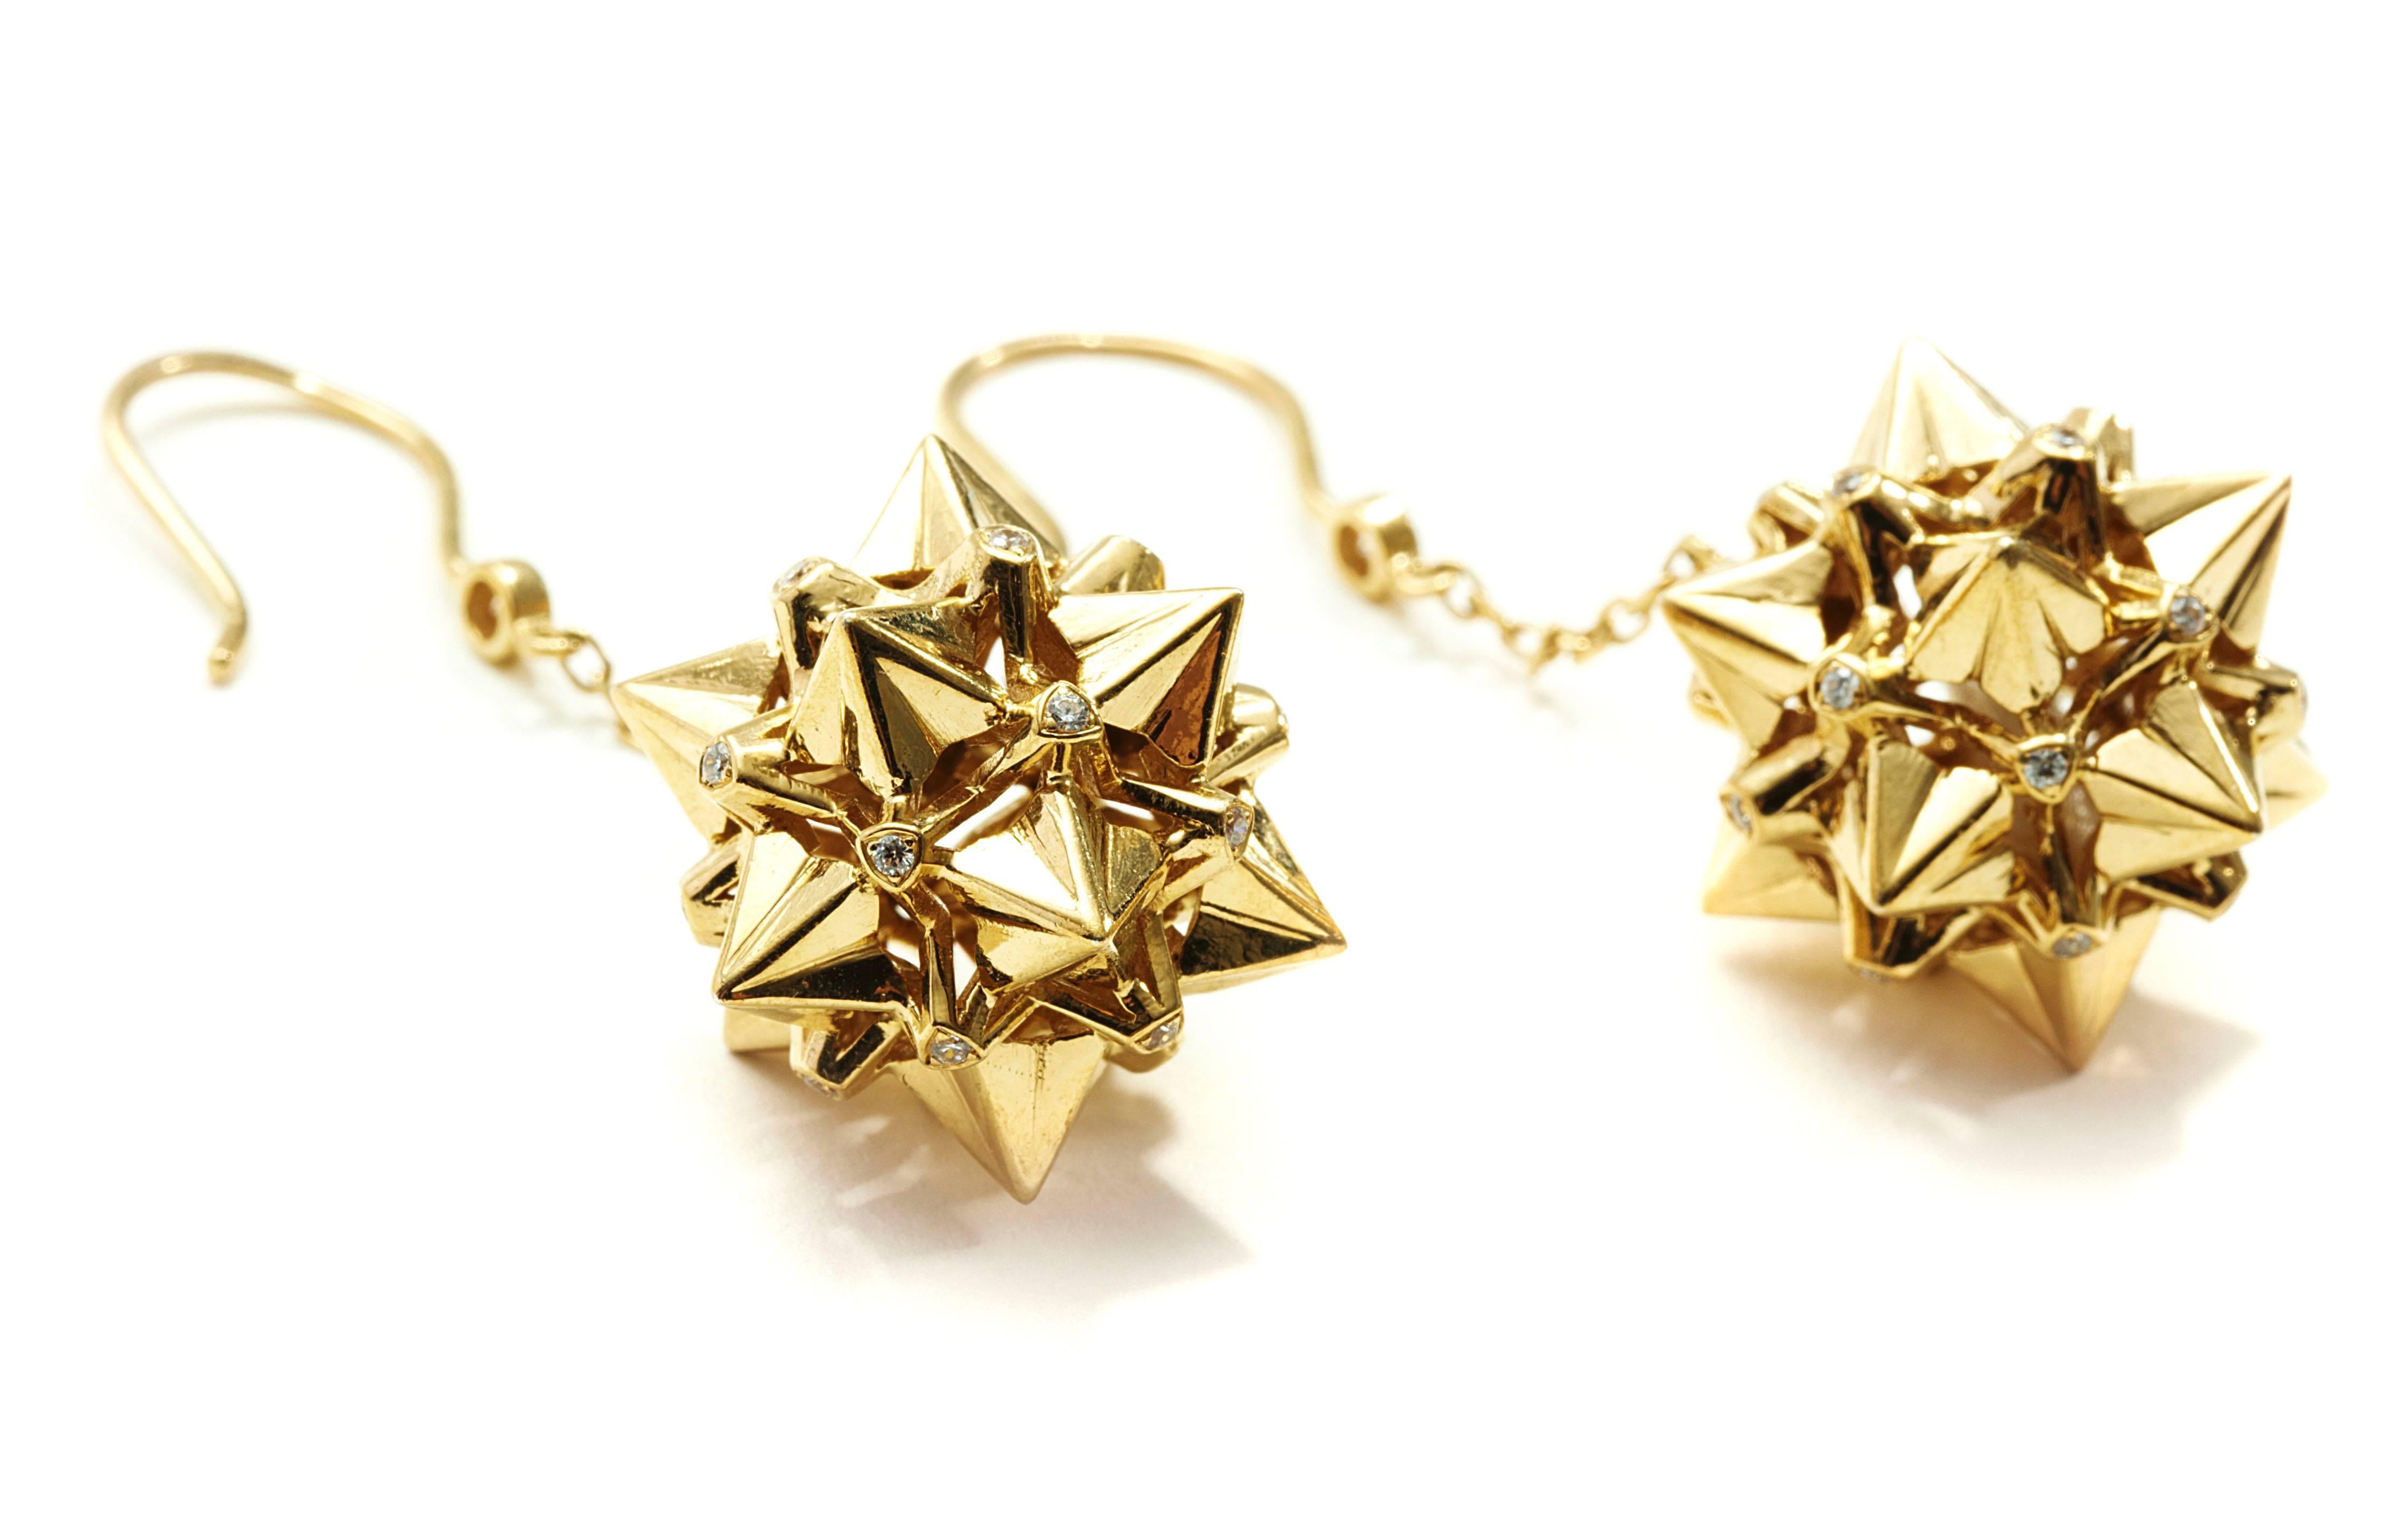 These Nova Diamond and 18K Gold Dangle Earrings are a statement of strength and power. Designer John Brevard used principles of sacred geometry to design these earrings for optimal strength and energy-capture. This piece is limited edition and